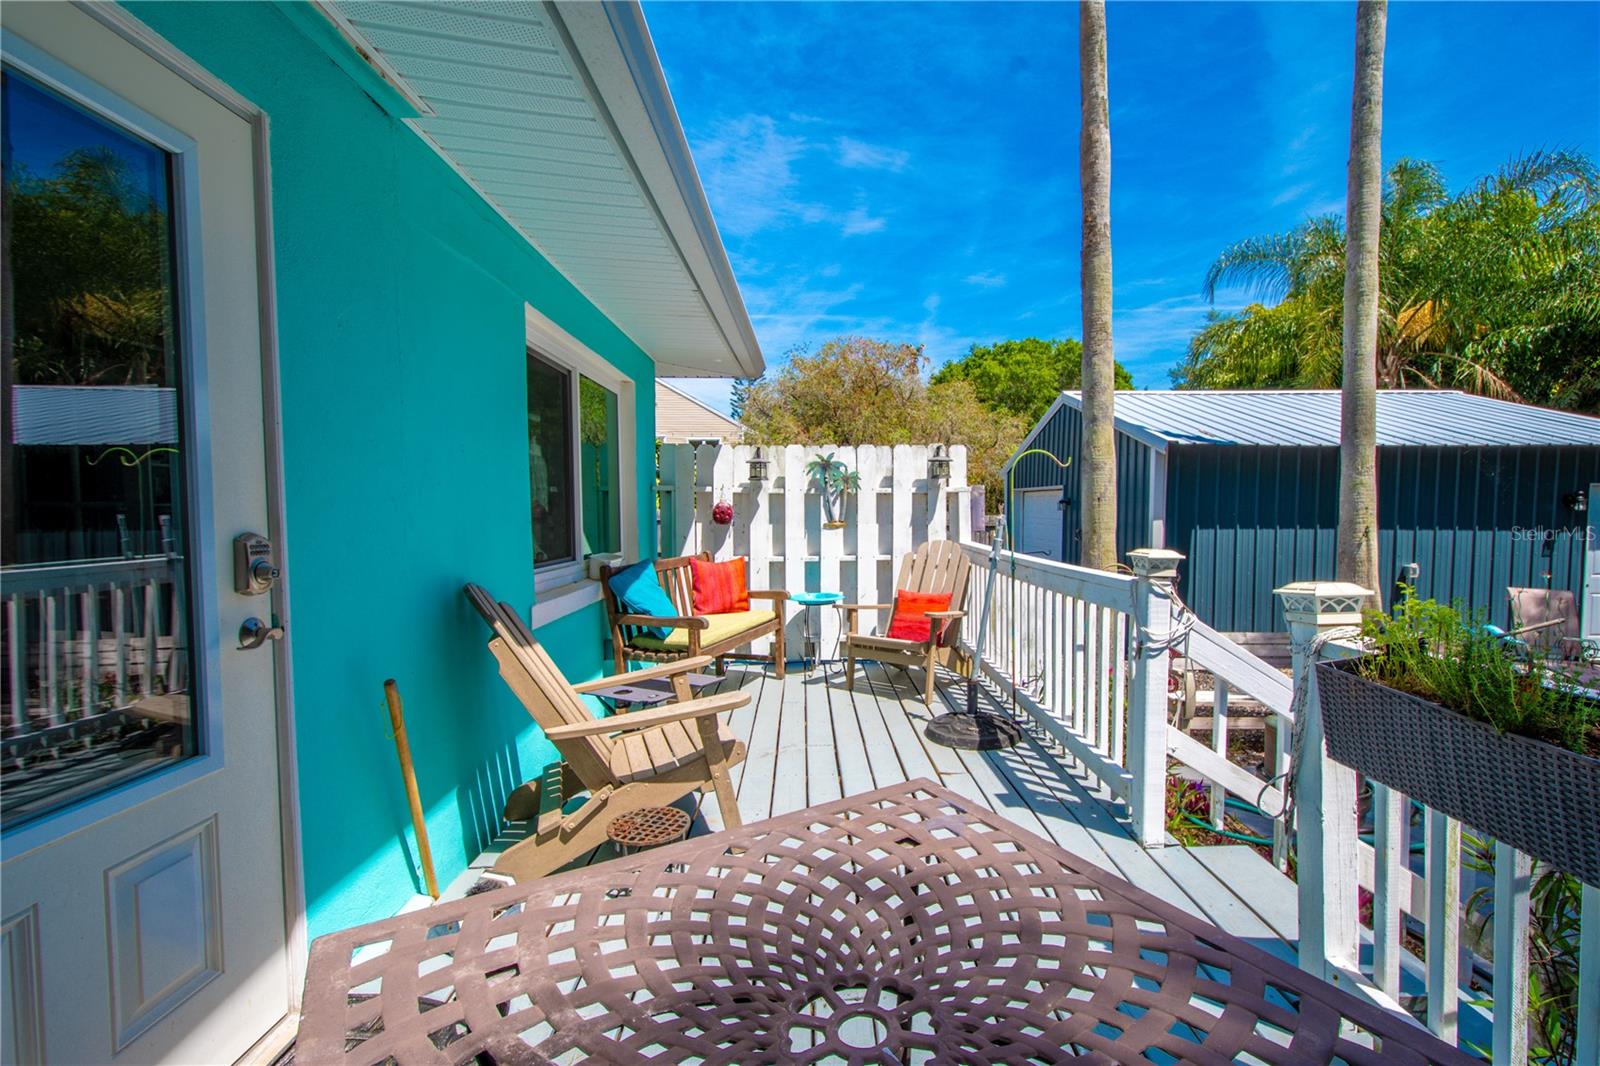 The backyard sun deck is the quintessential spot to relax and unwind.